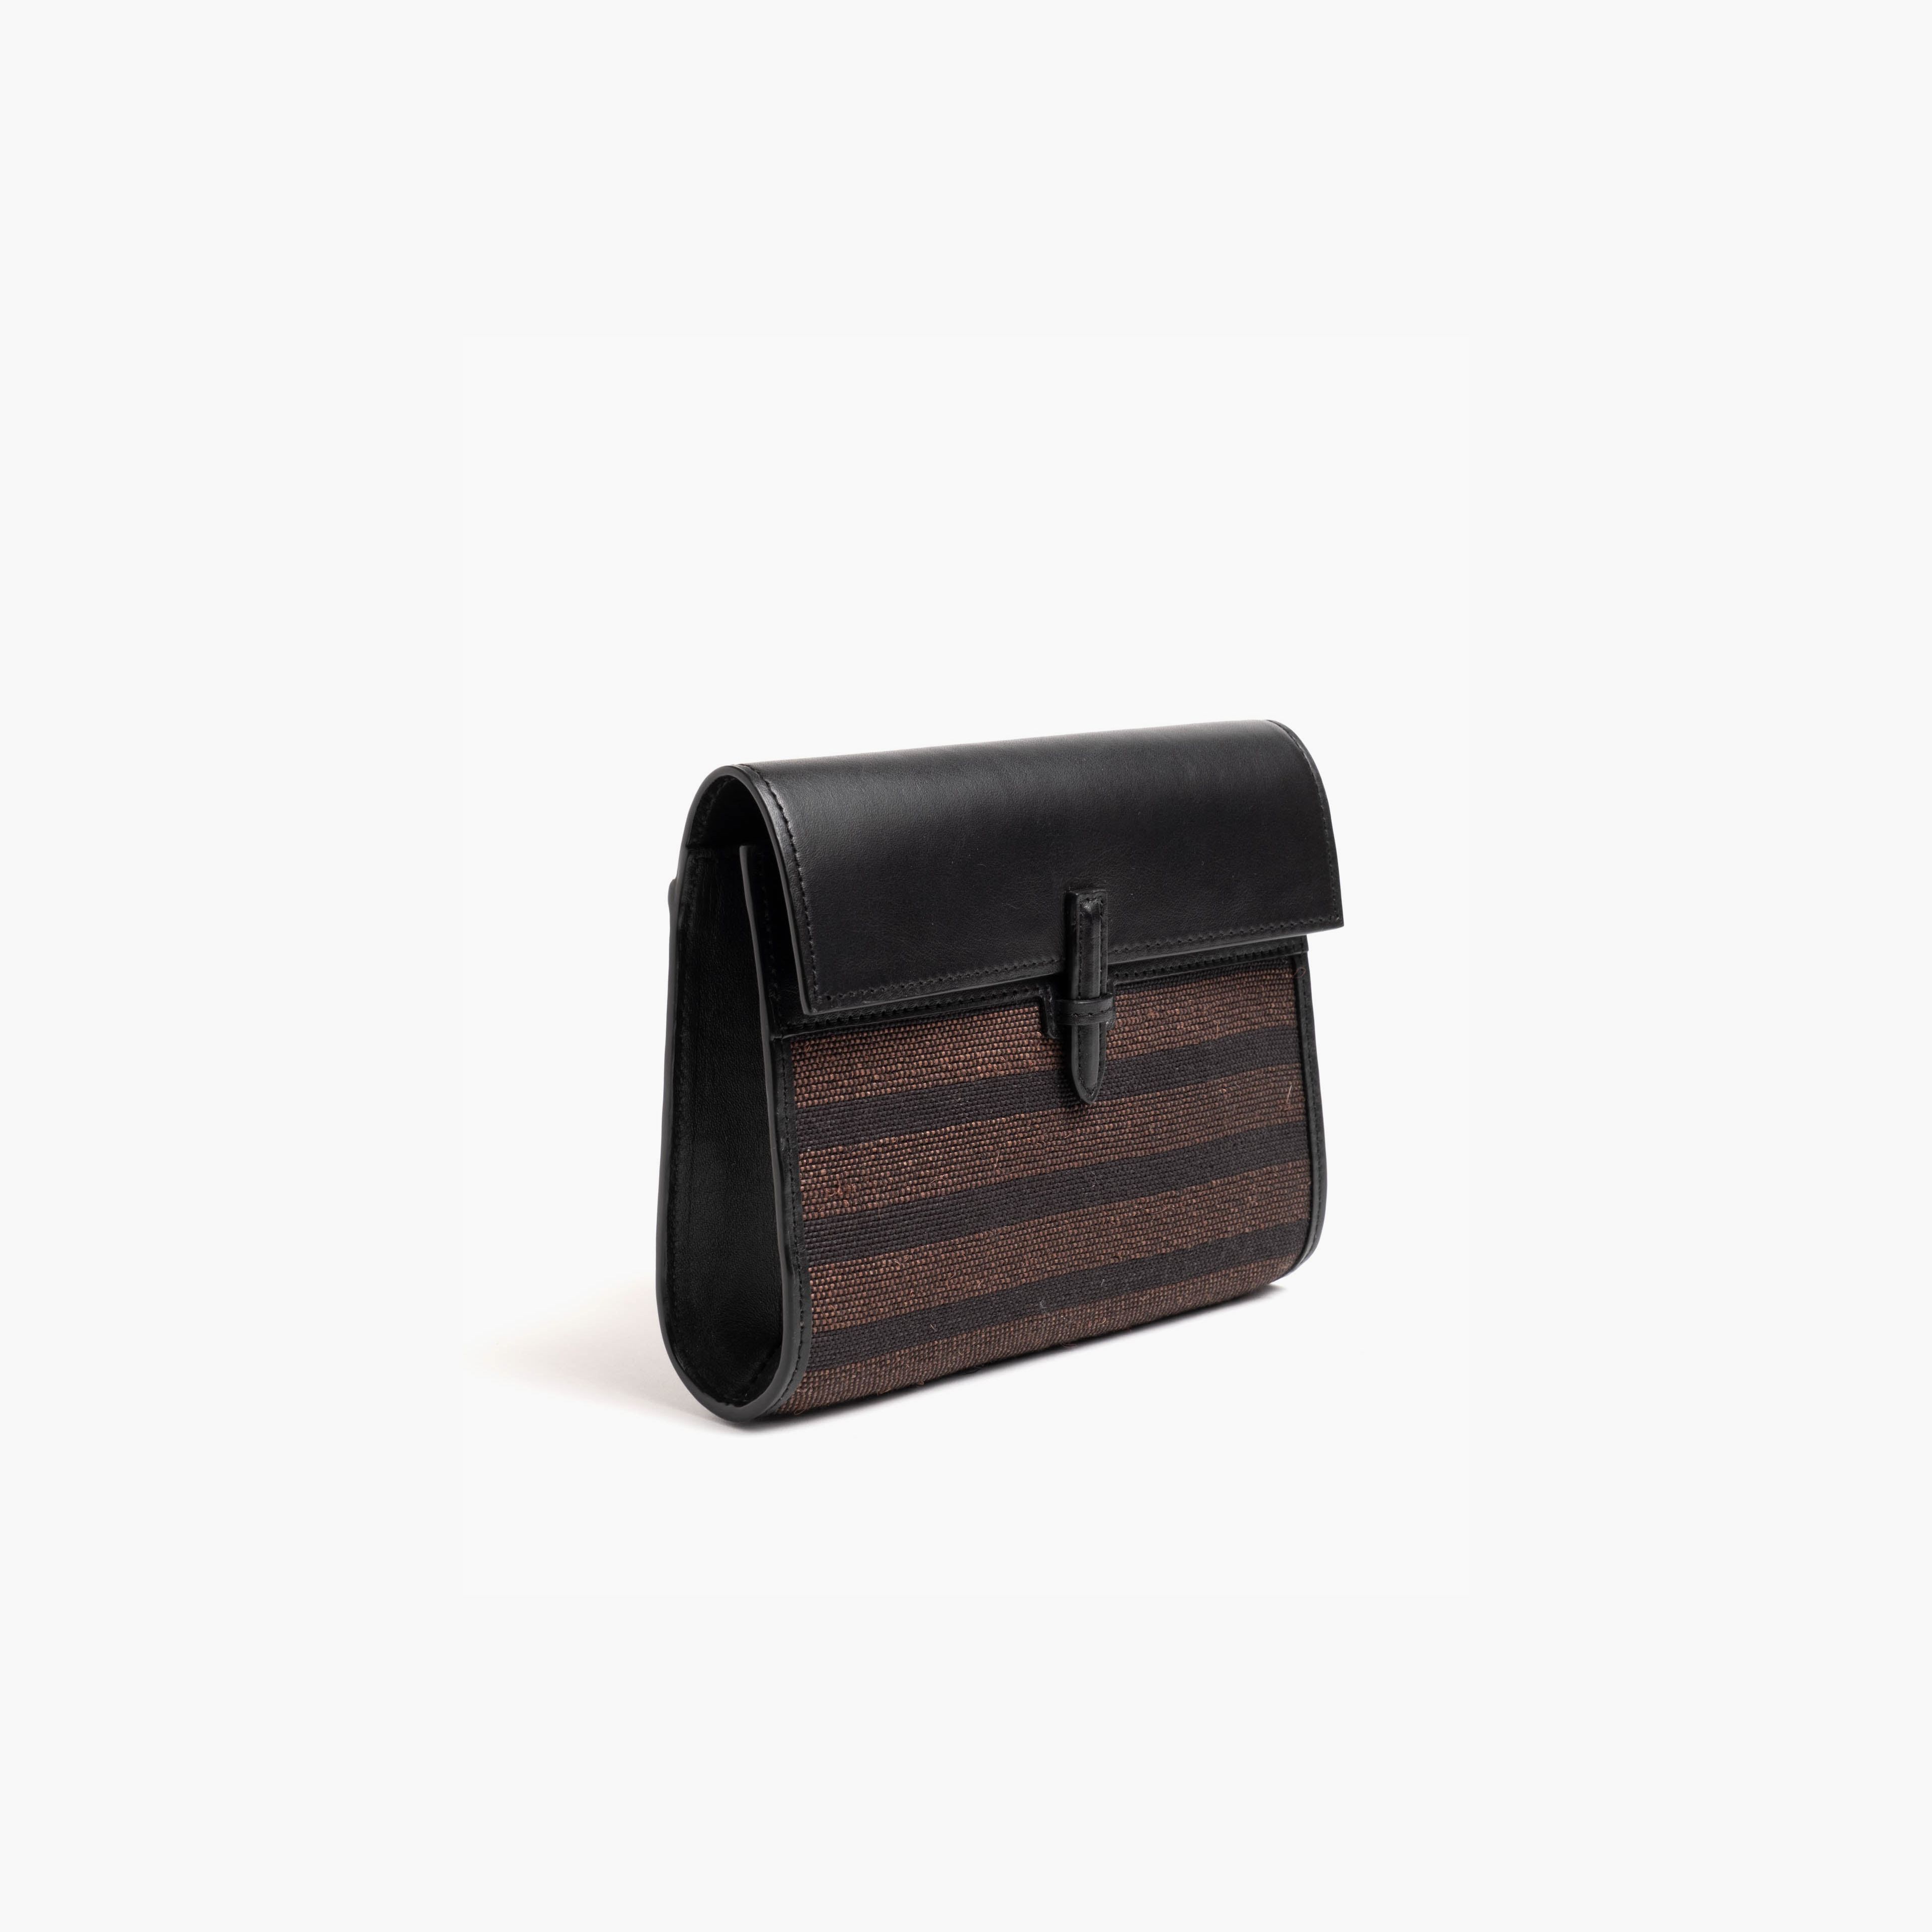 The Small Soft Clutch in Woven Fique